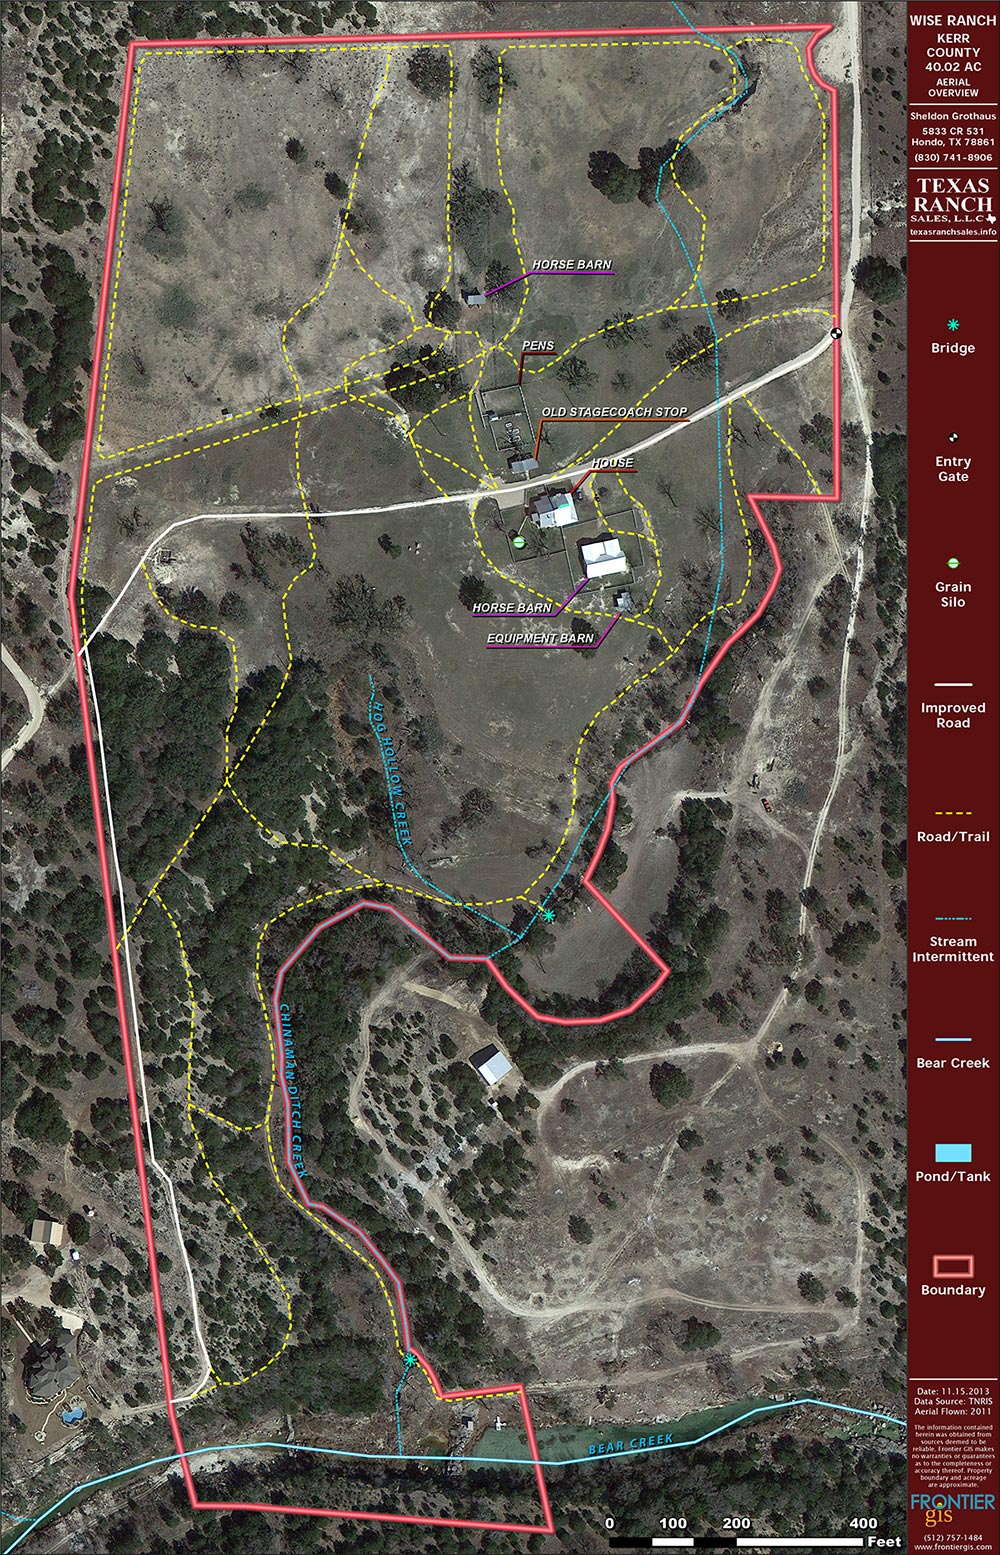 40 Acre Ranch Kerr Aerial Map